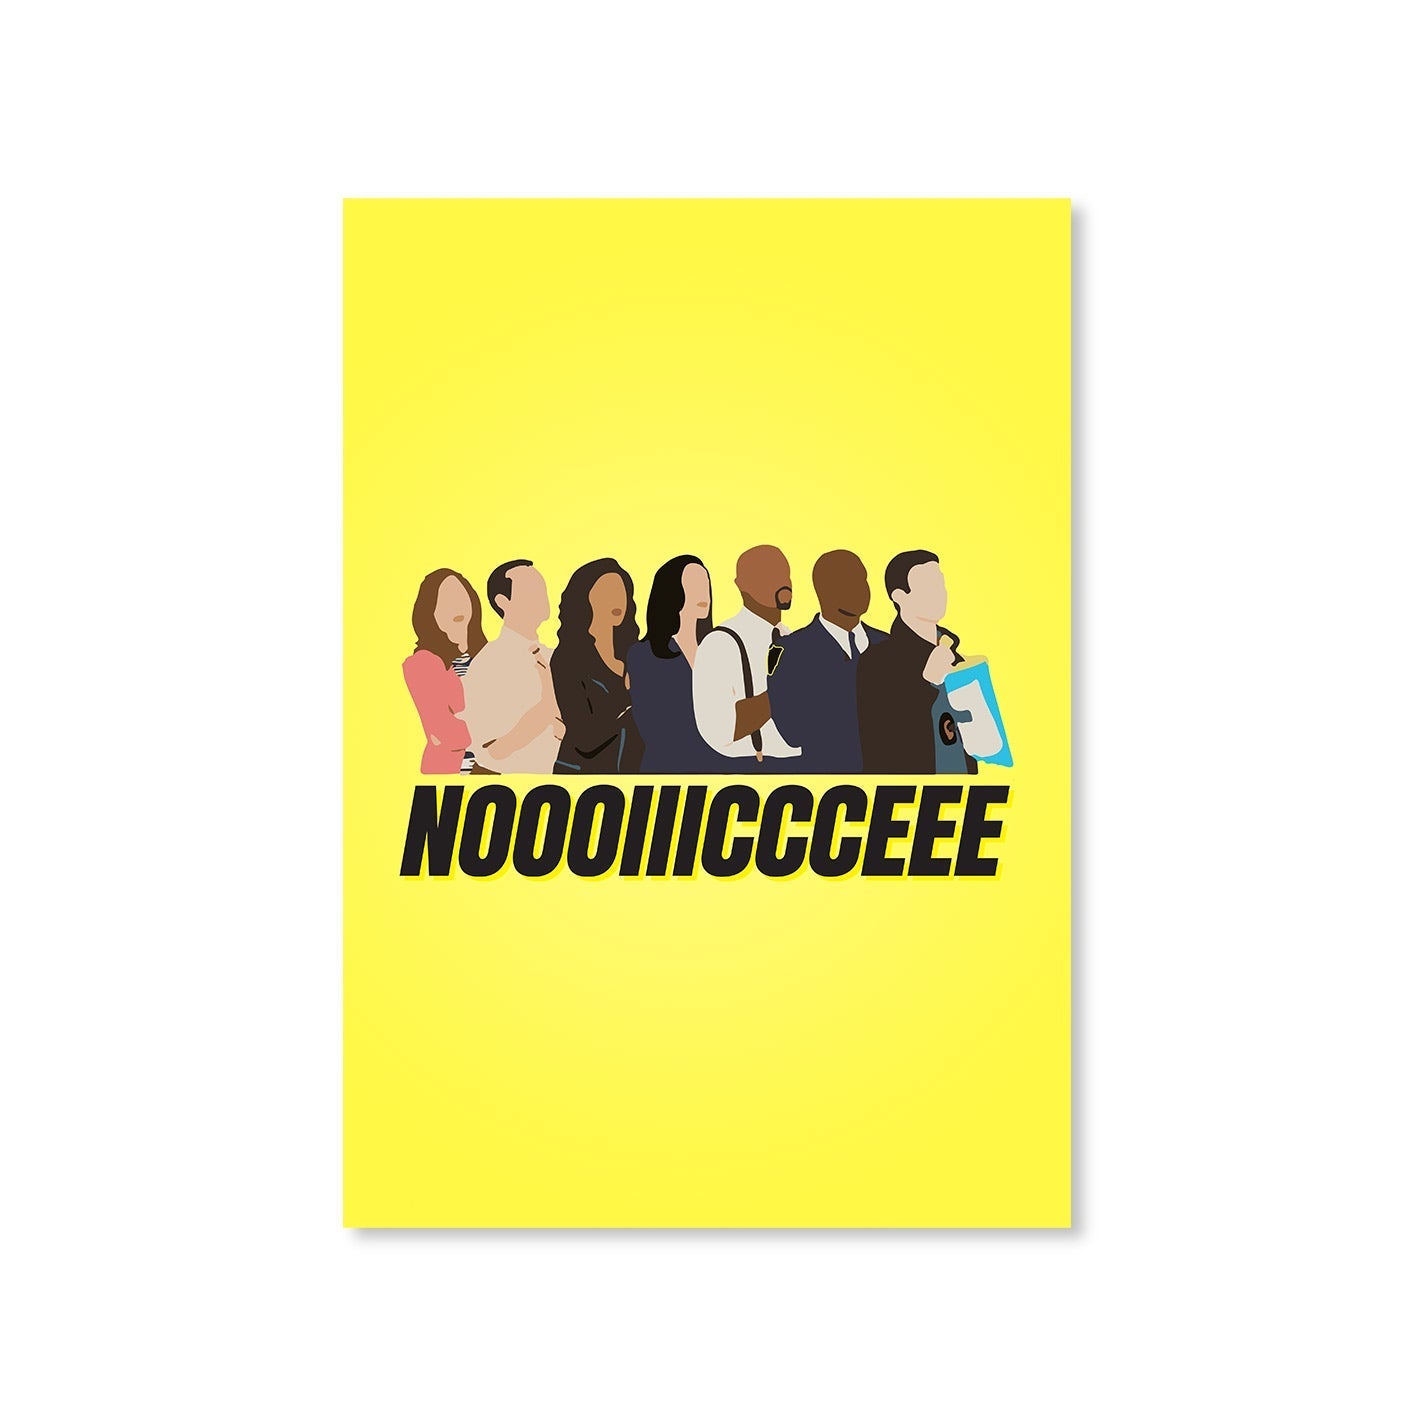 brooklyn nine-nine noooiiiccceee poster wall art buy online united states of america usa the banyan tee tbt a4 detective jake peralta terry charles boyle gina linetti andy samberg merchandise clothing acceessories